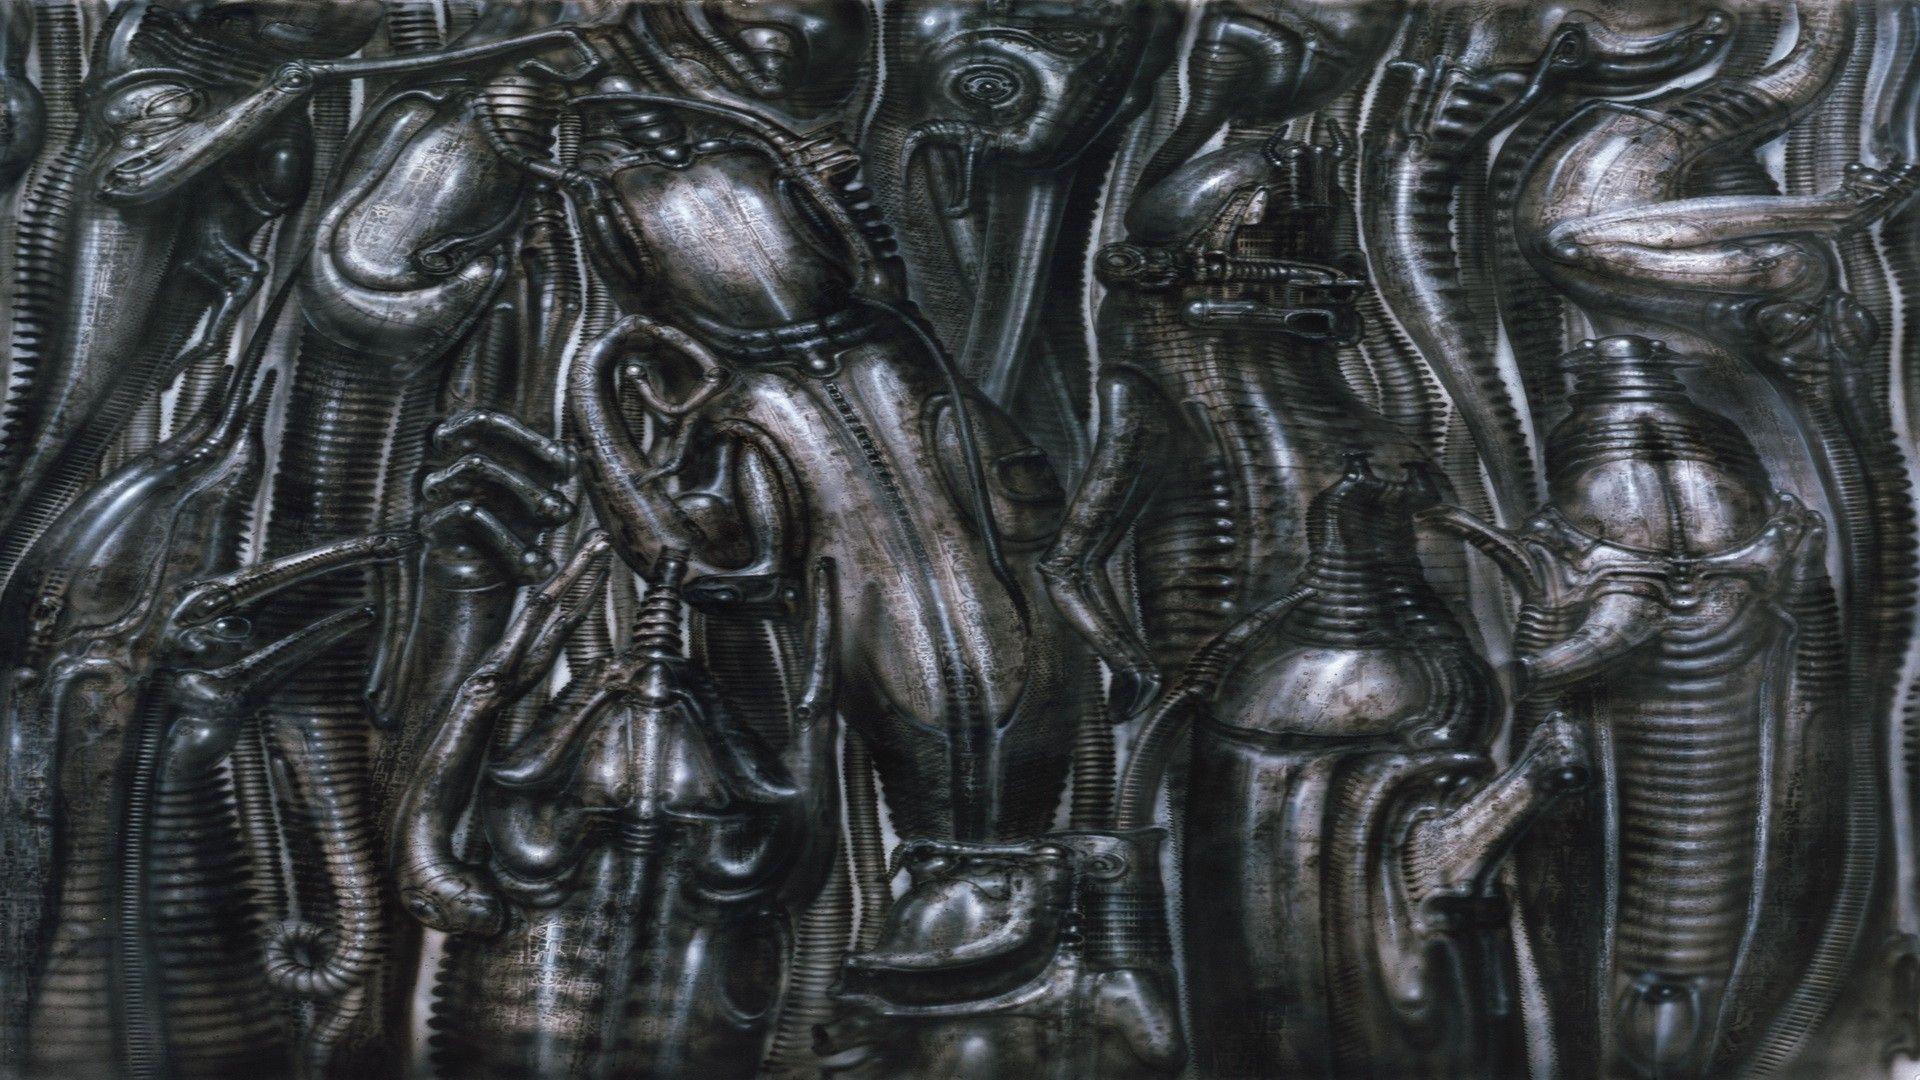 Hr Giger wallpaper for your Debian or Linux Mint desktop. These are